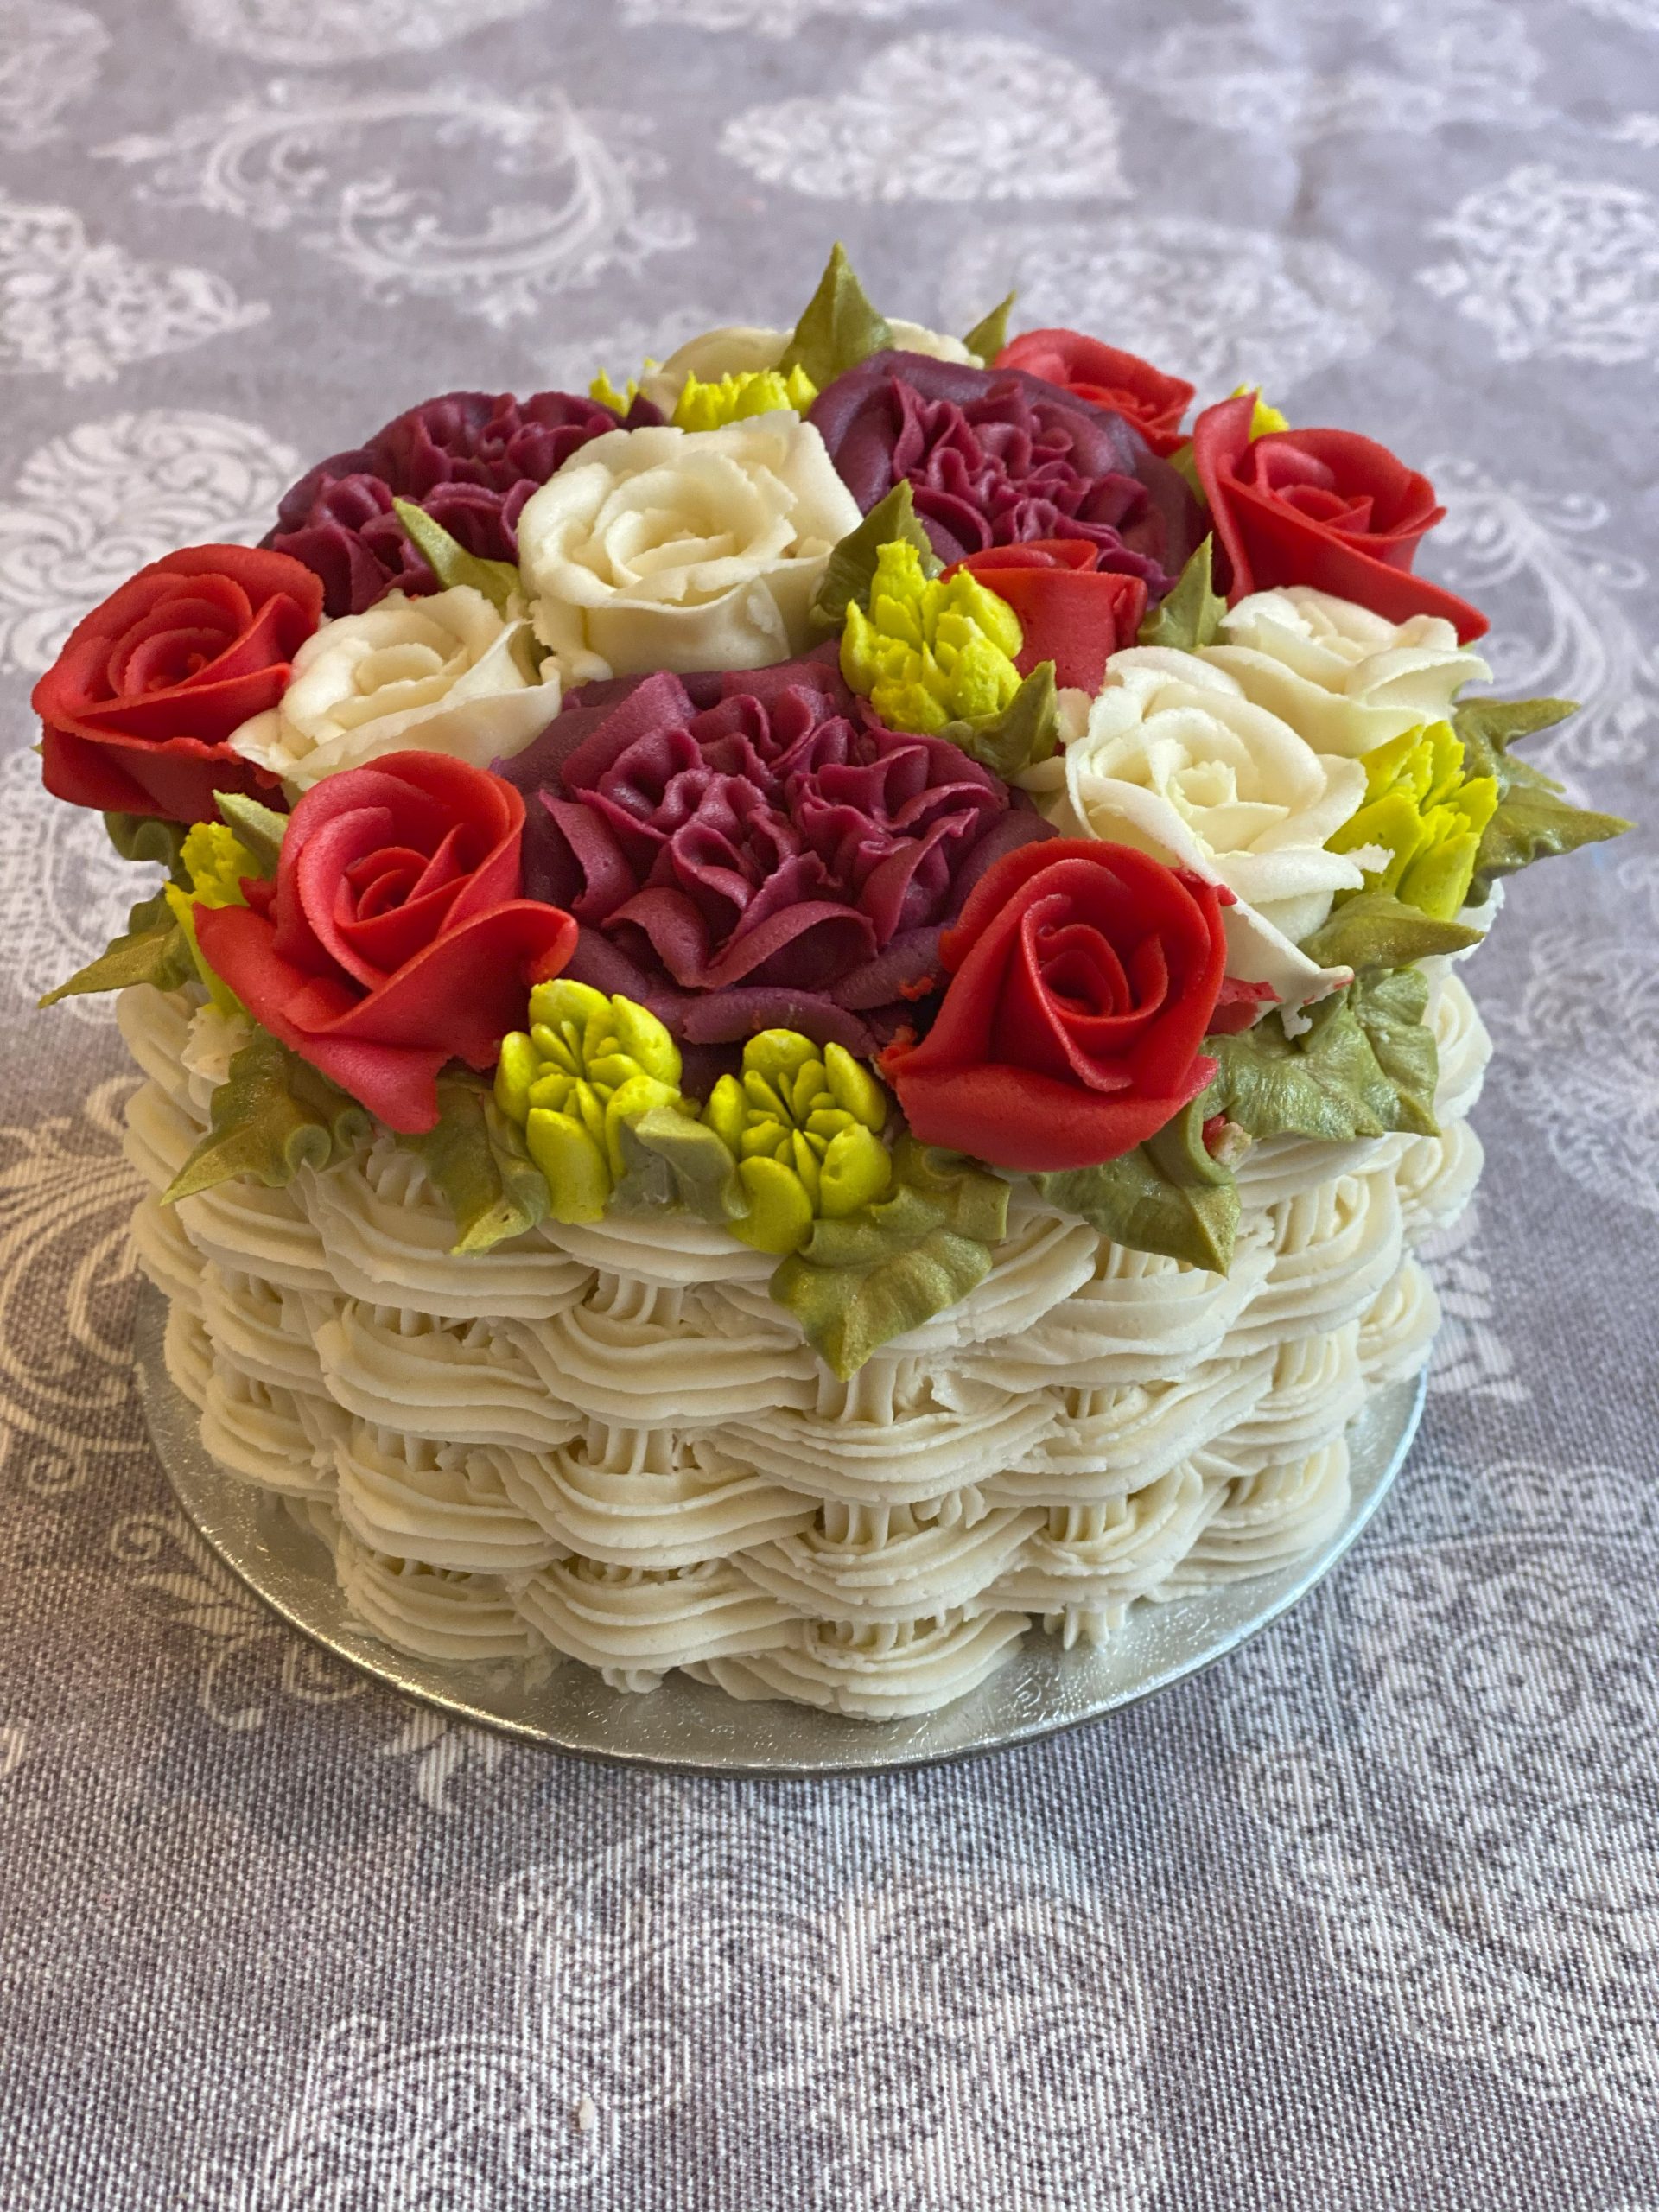 A floral bento cake with basketweave sides